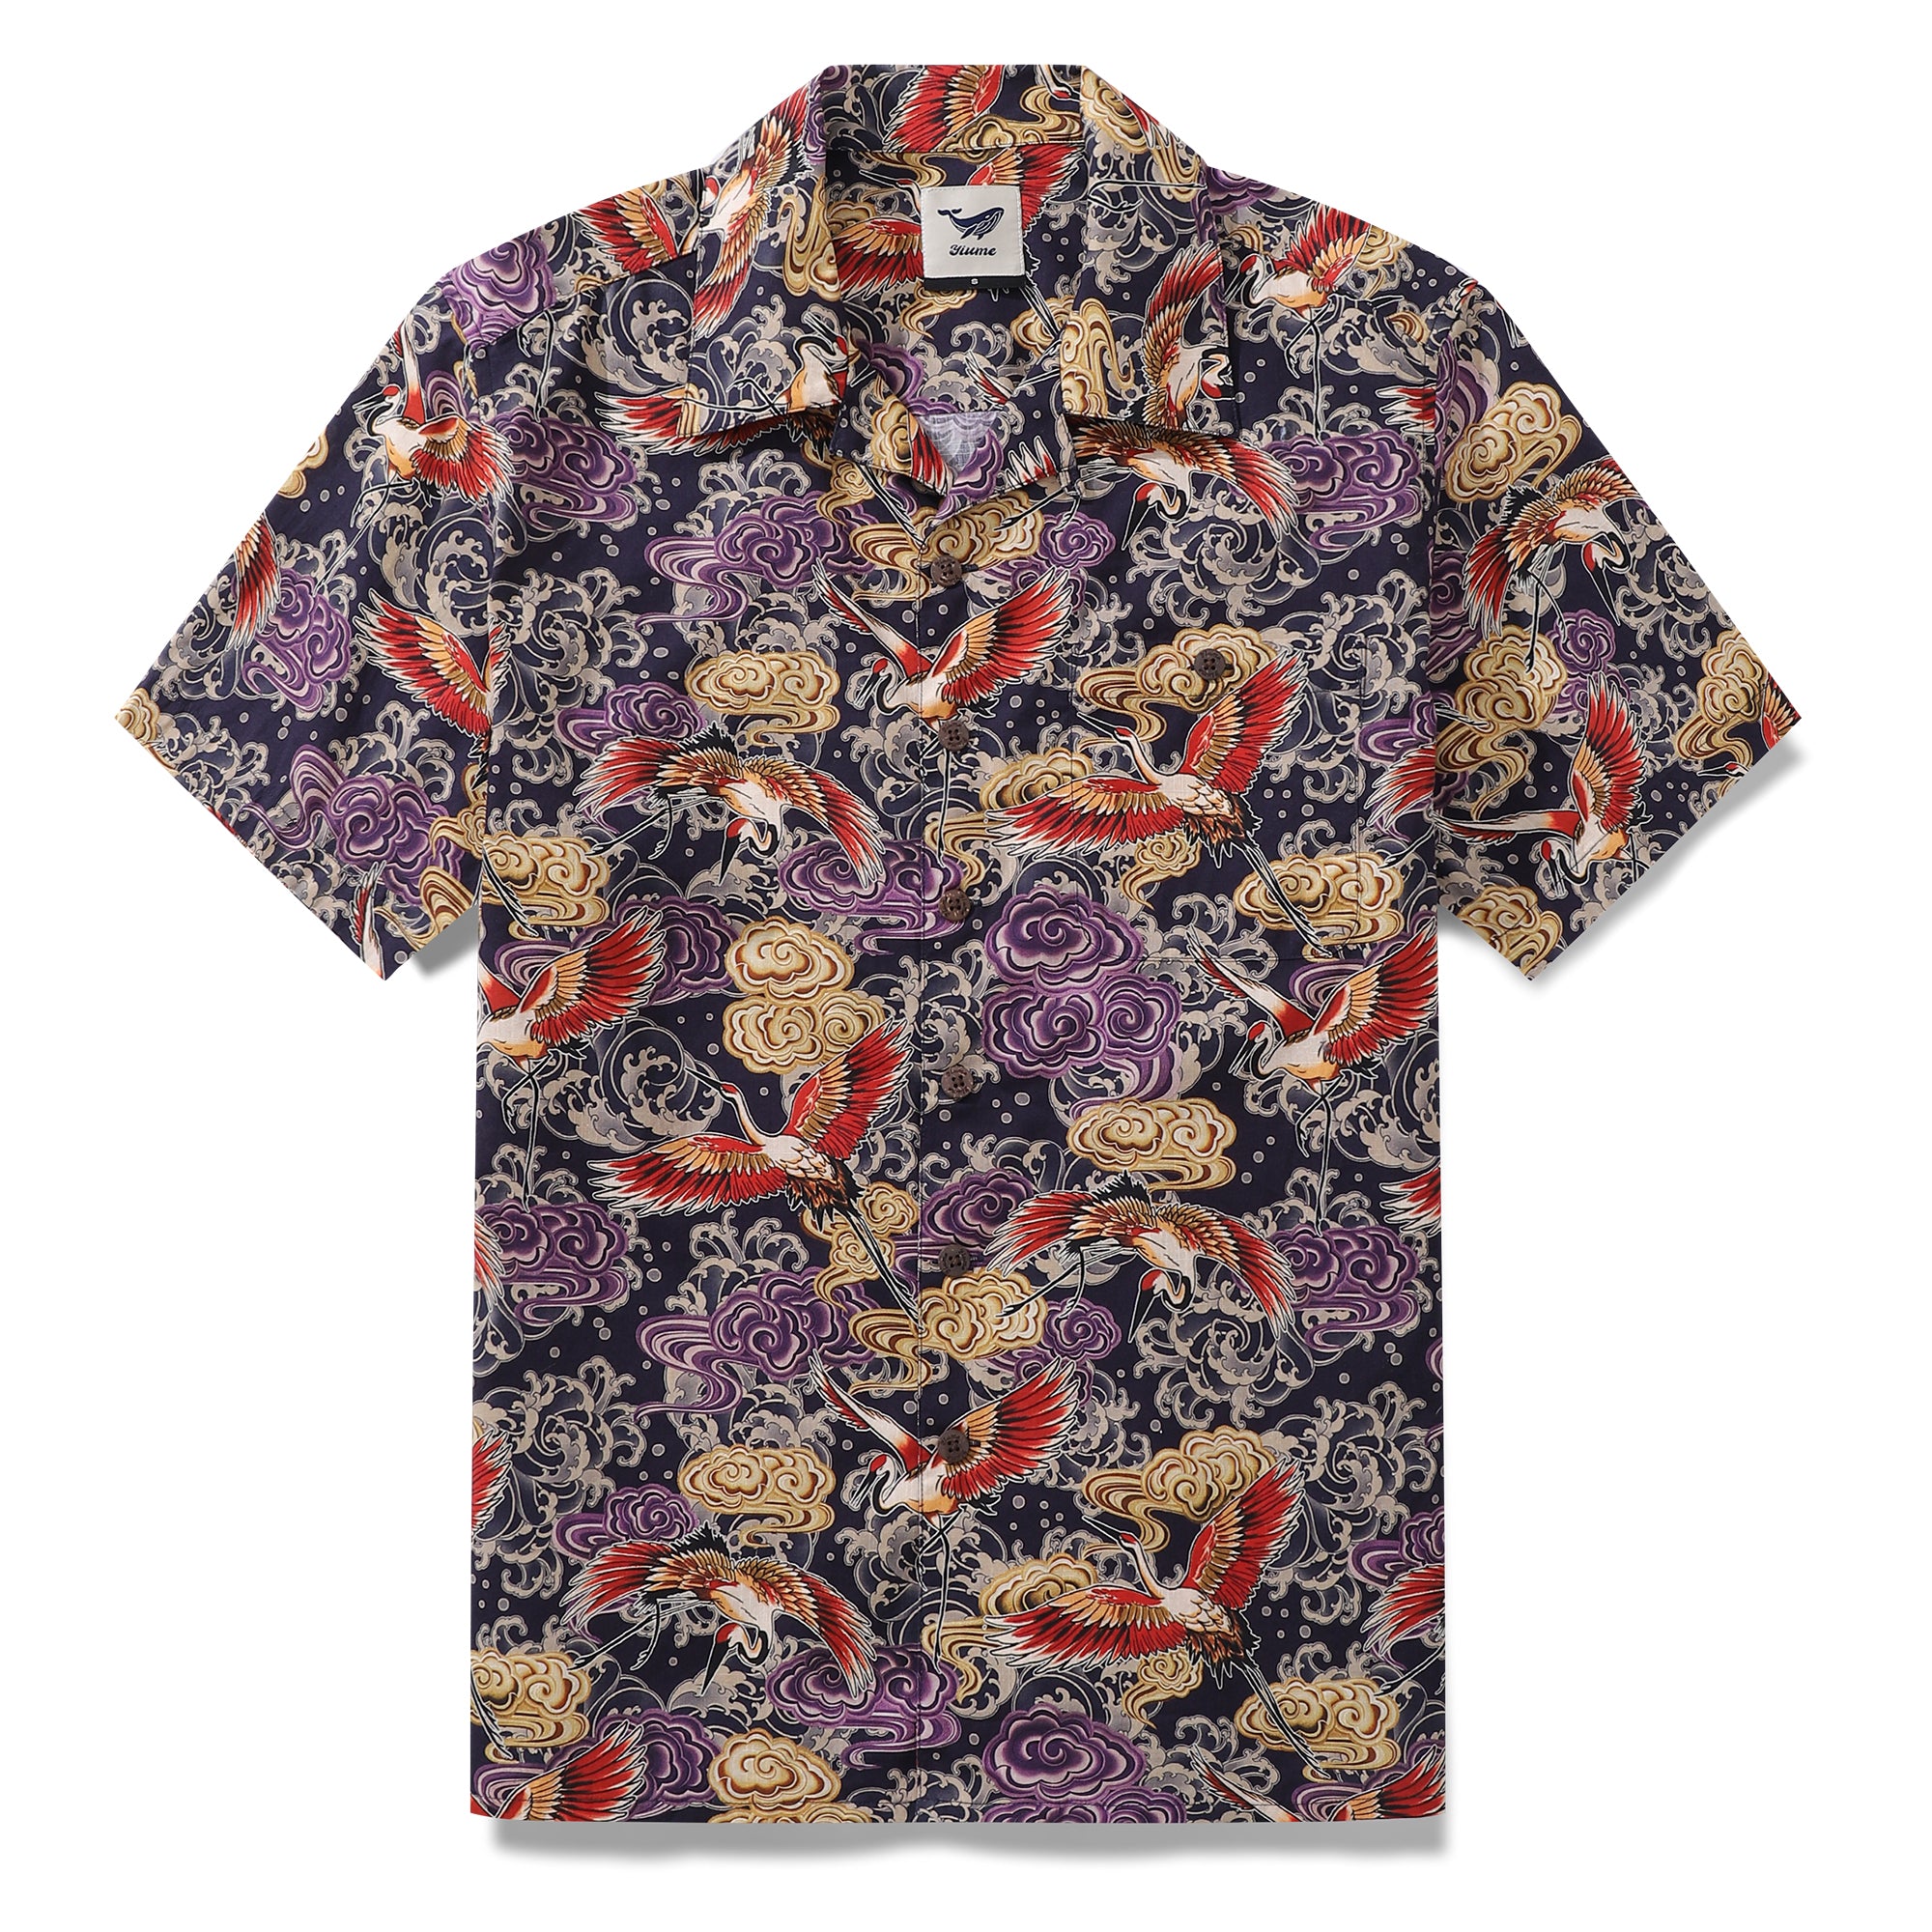 Hawaiian Shirt For Men Lonely Clouds and Free Cranes Print Shirt Camp Collar 100% Cotton